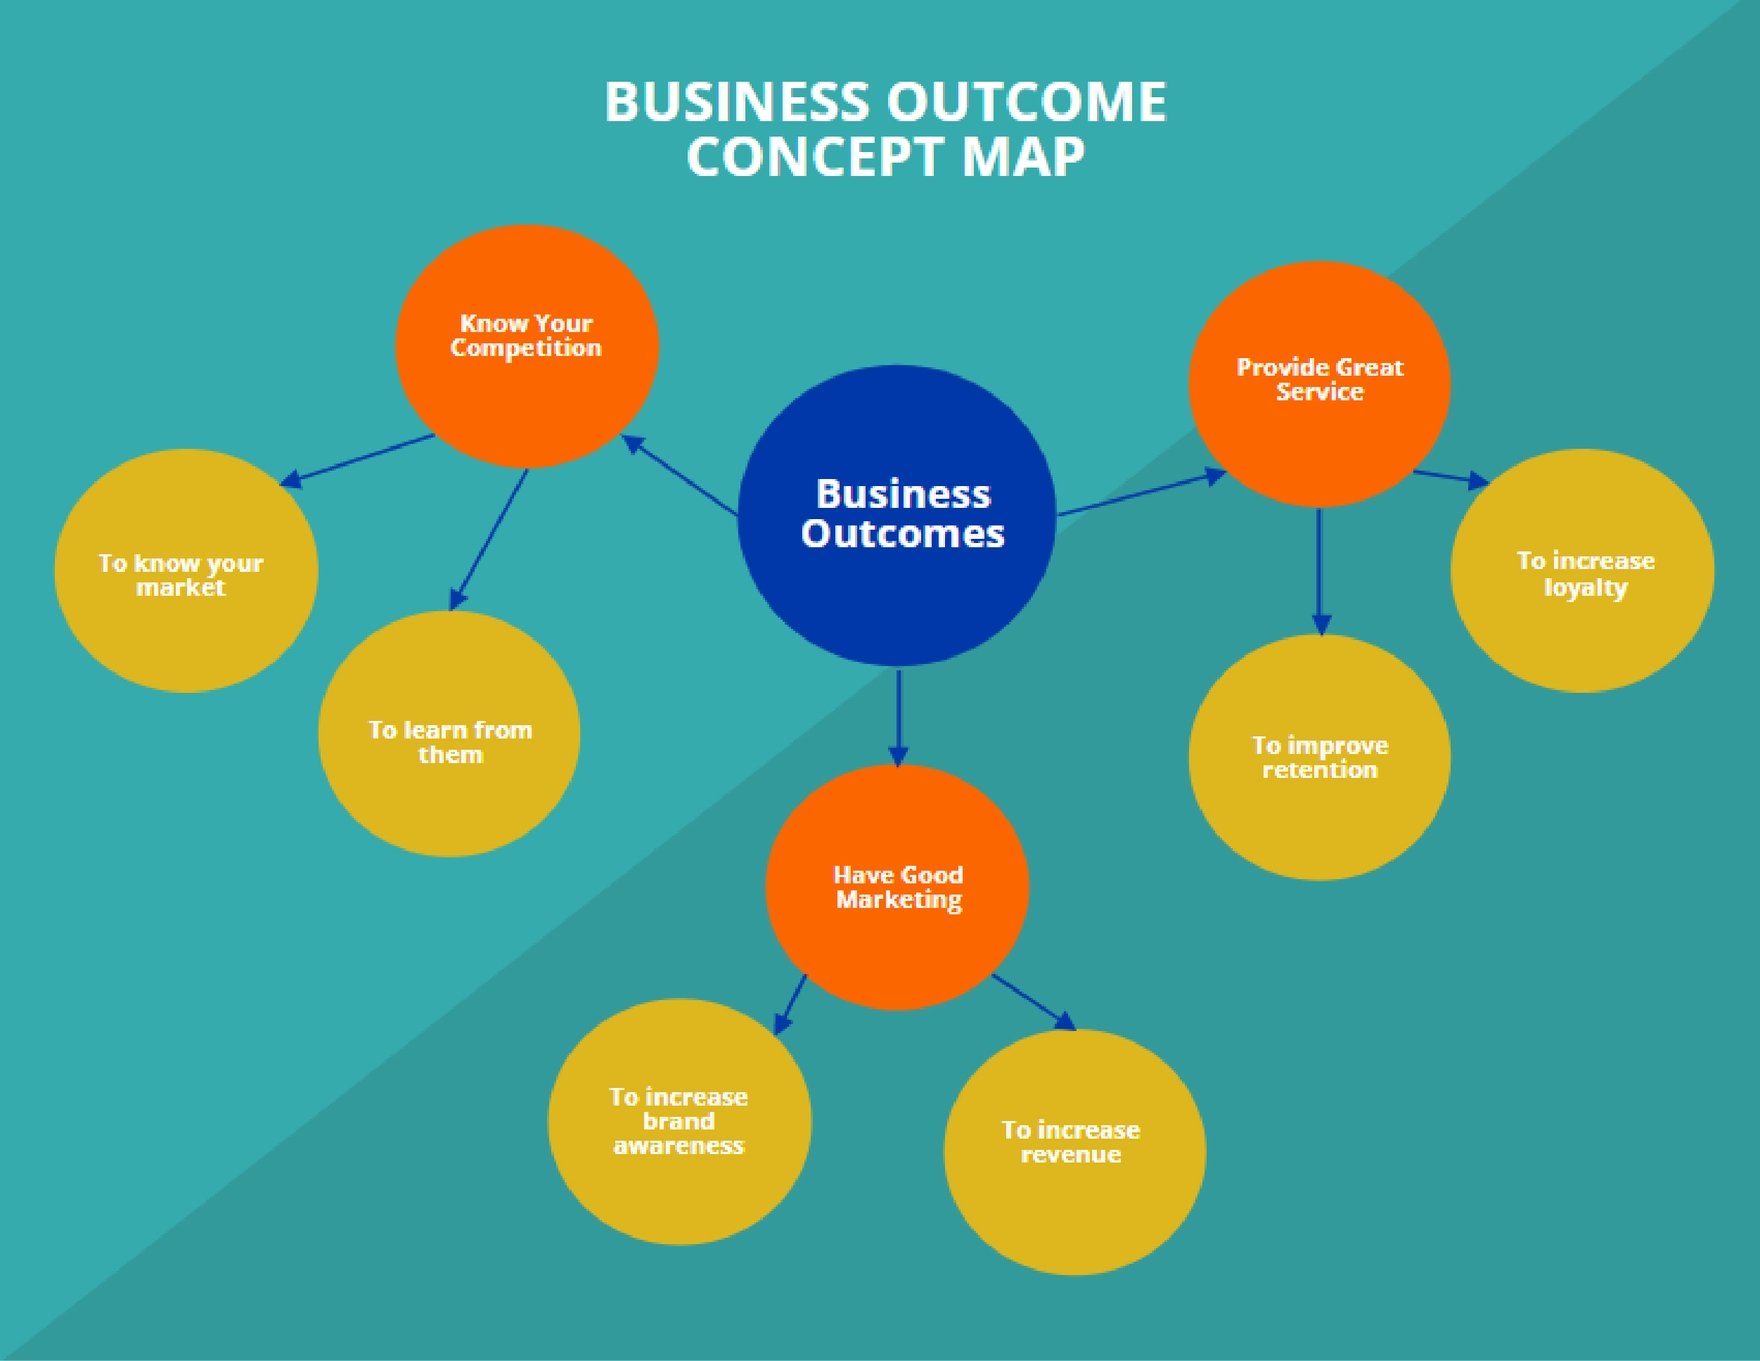 Business Outcome Concept Map Template in Word, Google Docs